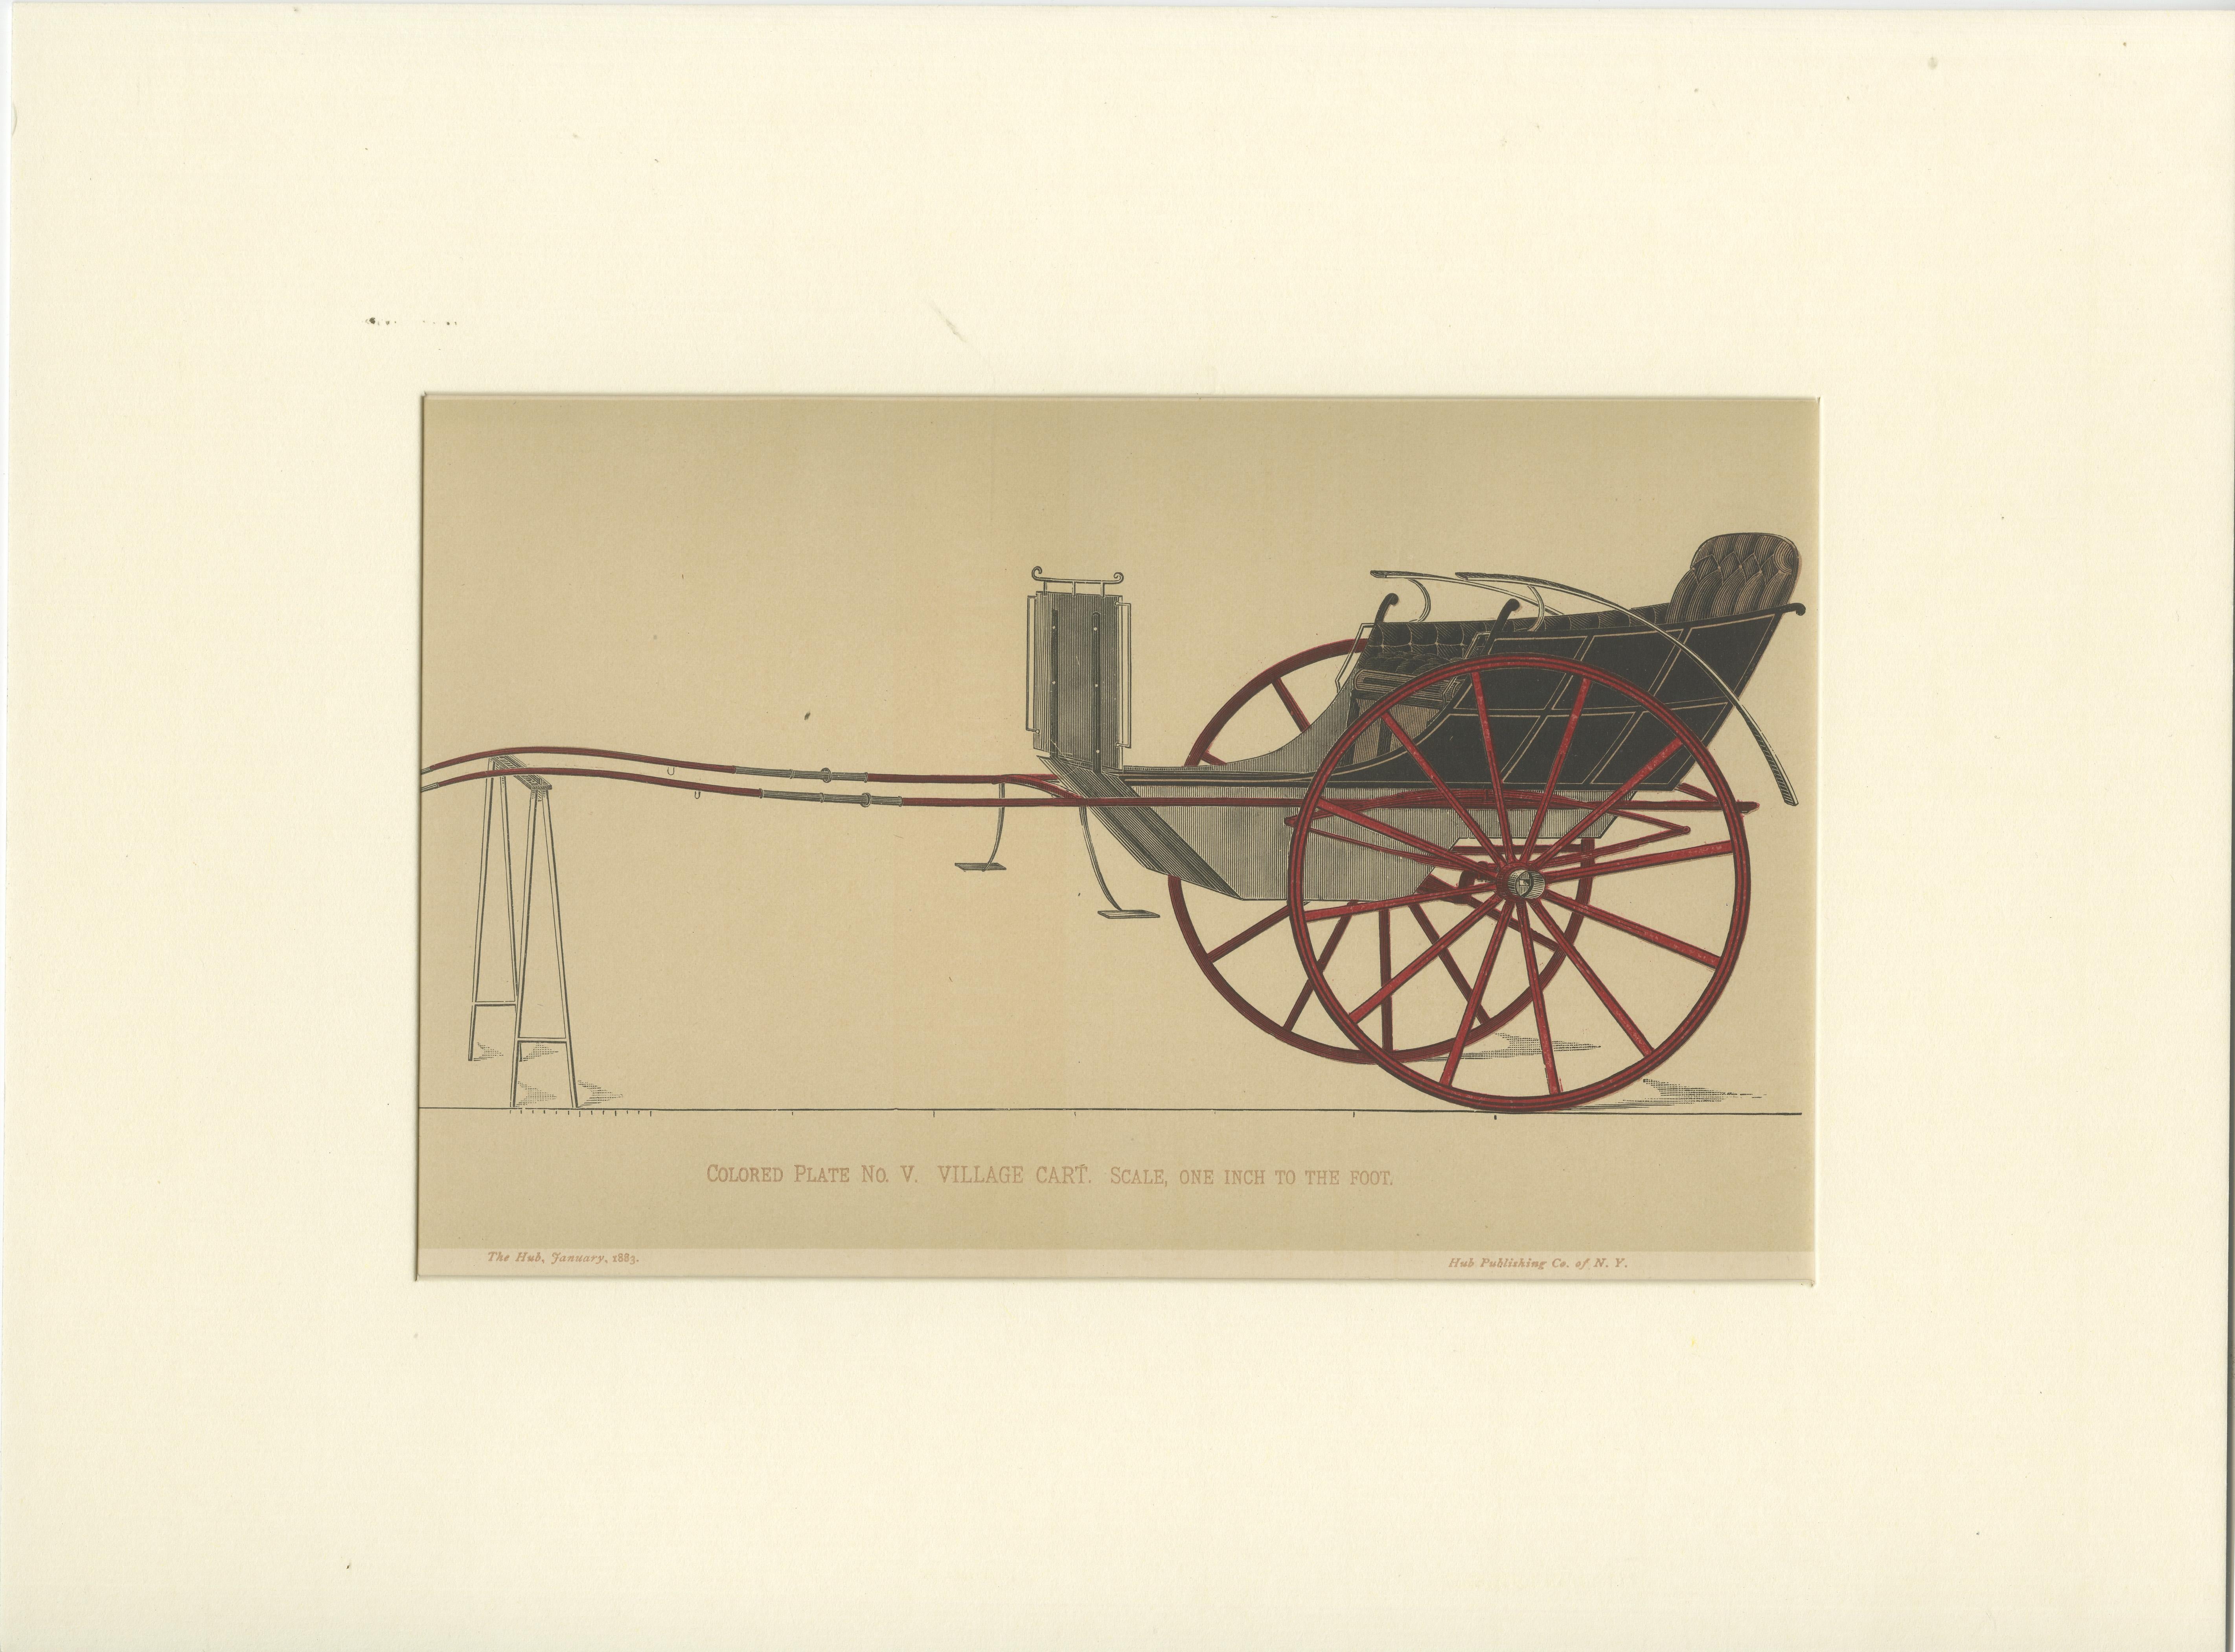 Antique print titled 'Colored Plate No. V Village Cart (..)'. Original print of a two wheeled village cart. This print originates from 'The Hub, Carriage Makers trade magazine'. Published 1883. 